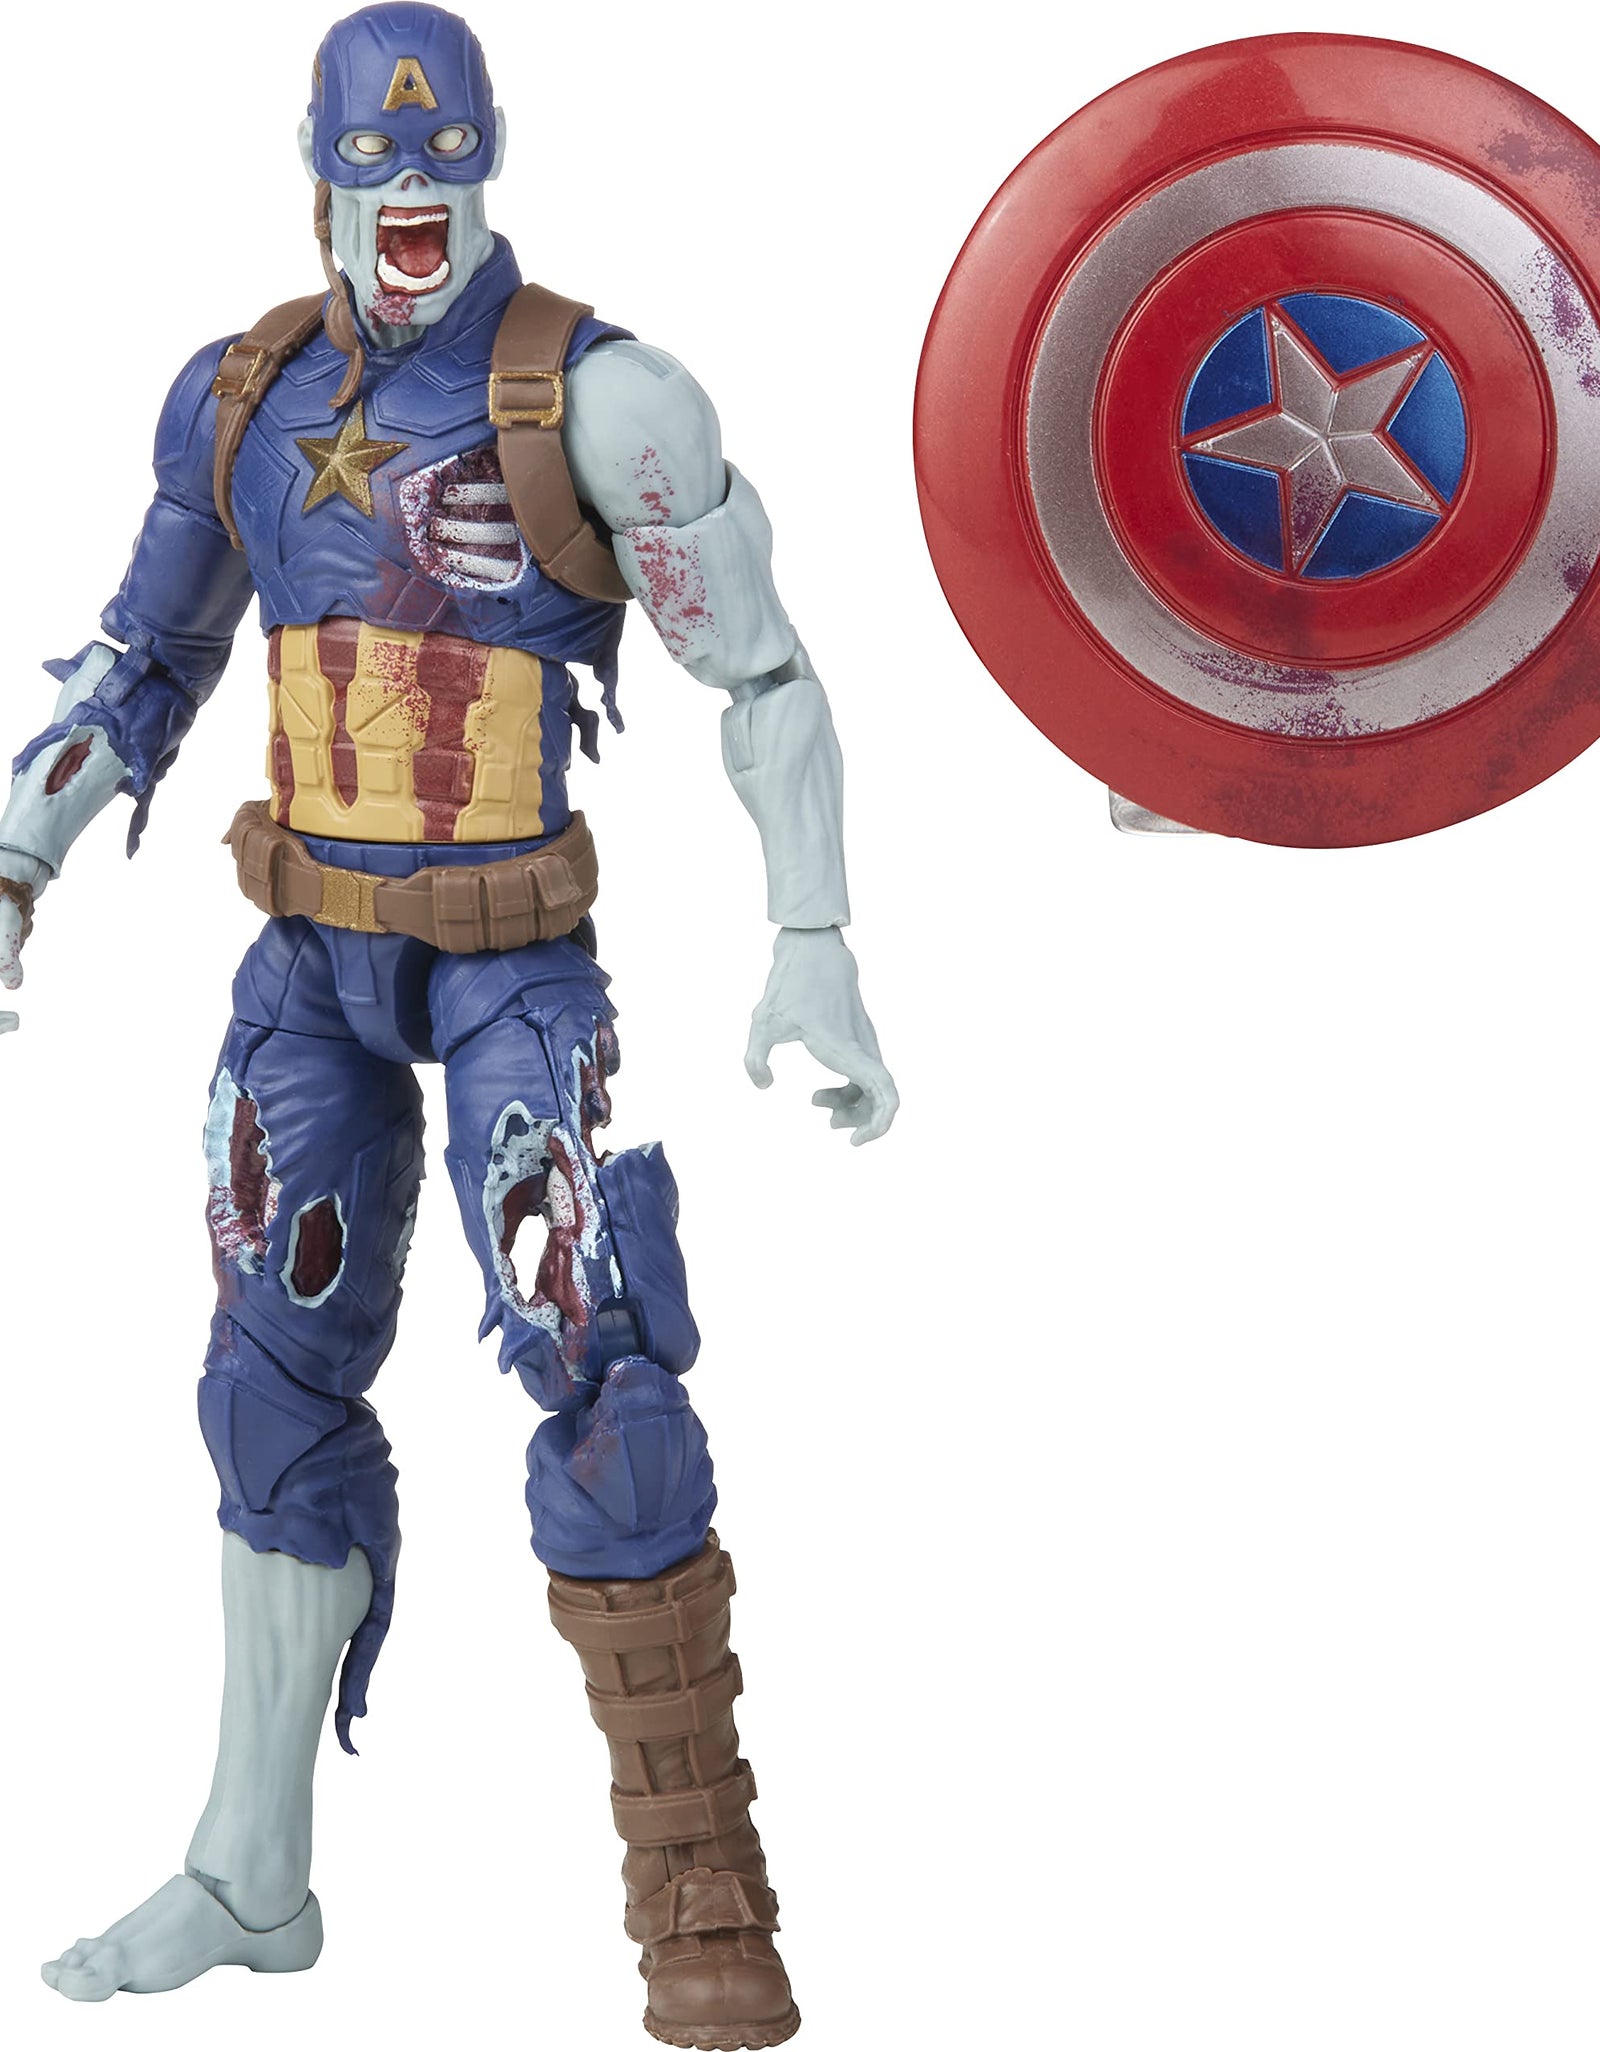 Marvel Legends Series 6-inch Scale Action Figure Toy Zombie Captain America, Premium Design, 1 Figure, and 1 Accessory